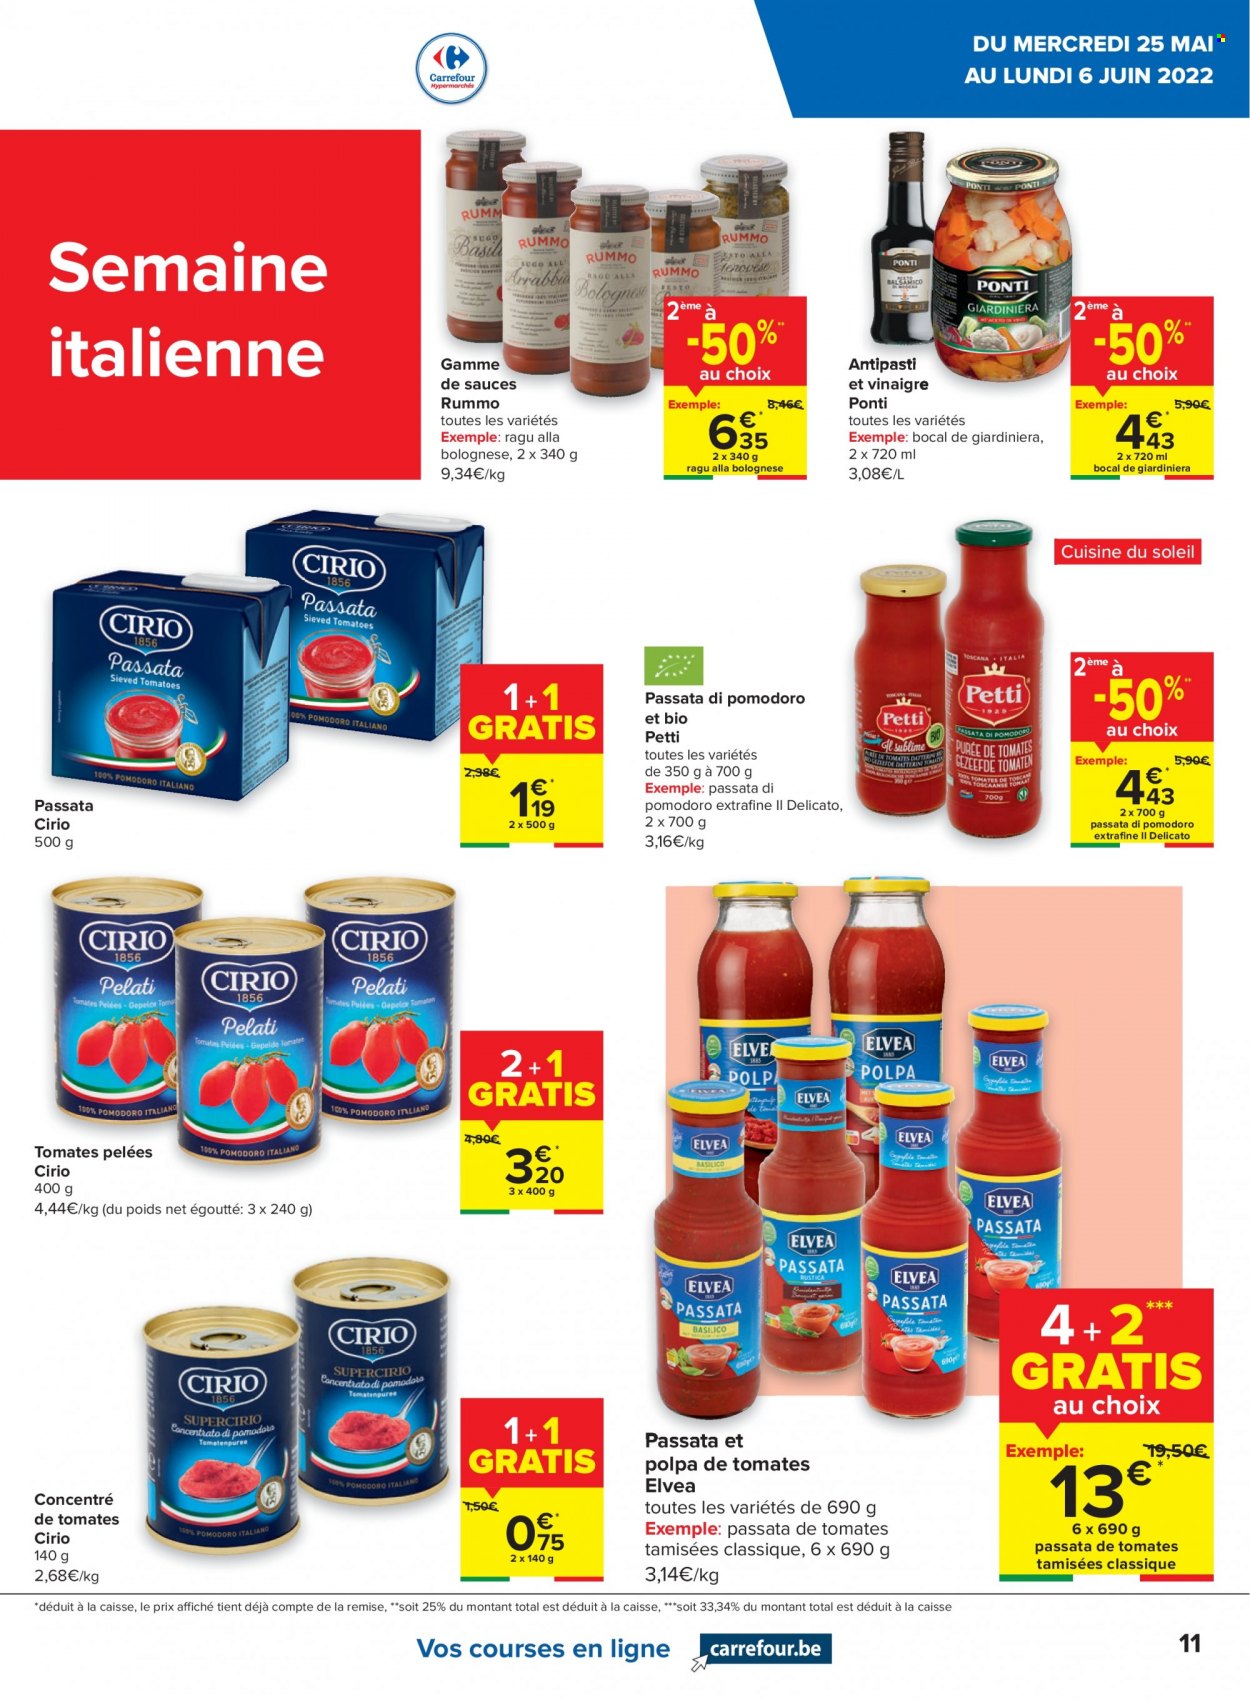 Catalogue Carrefour hypermarkt - 25.5.2022 - 31.5.2022. Page 11.